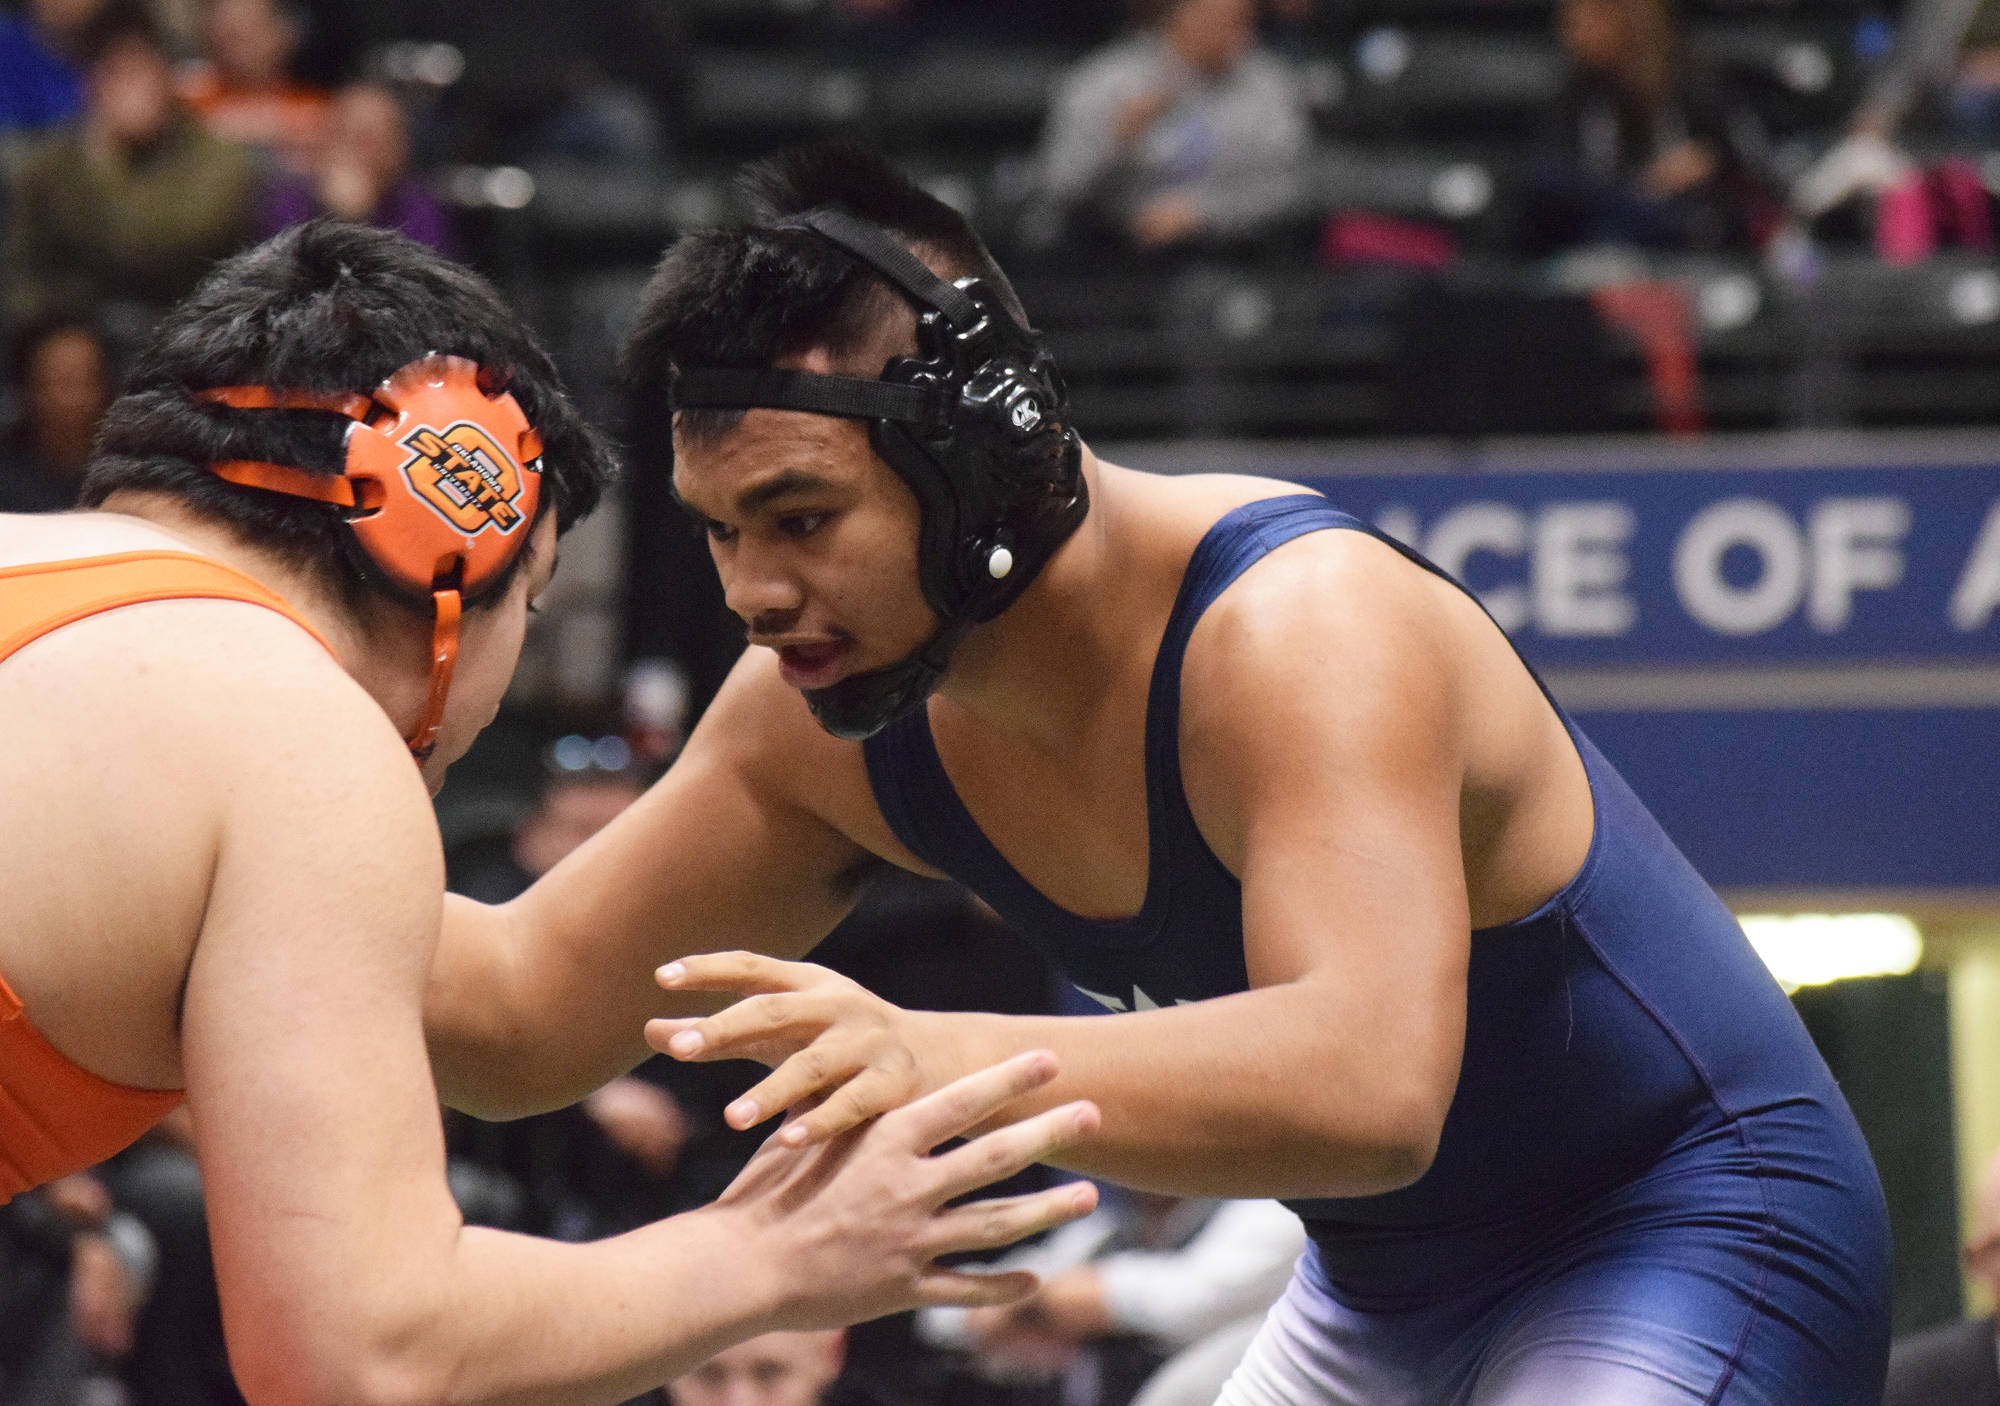 Soldotna senior Aaron Faletoi anticipates the moves of West Anchorage’s Kelton Mock in the 215-pound final Saturday, Dec. 15, 2018 at the Div. I state wrestling championships at the Alaska Airlines Center in Anchorage, Alaska. (Photo by Joey Klecka/Peninsula Clarion)